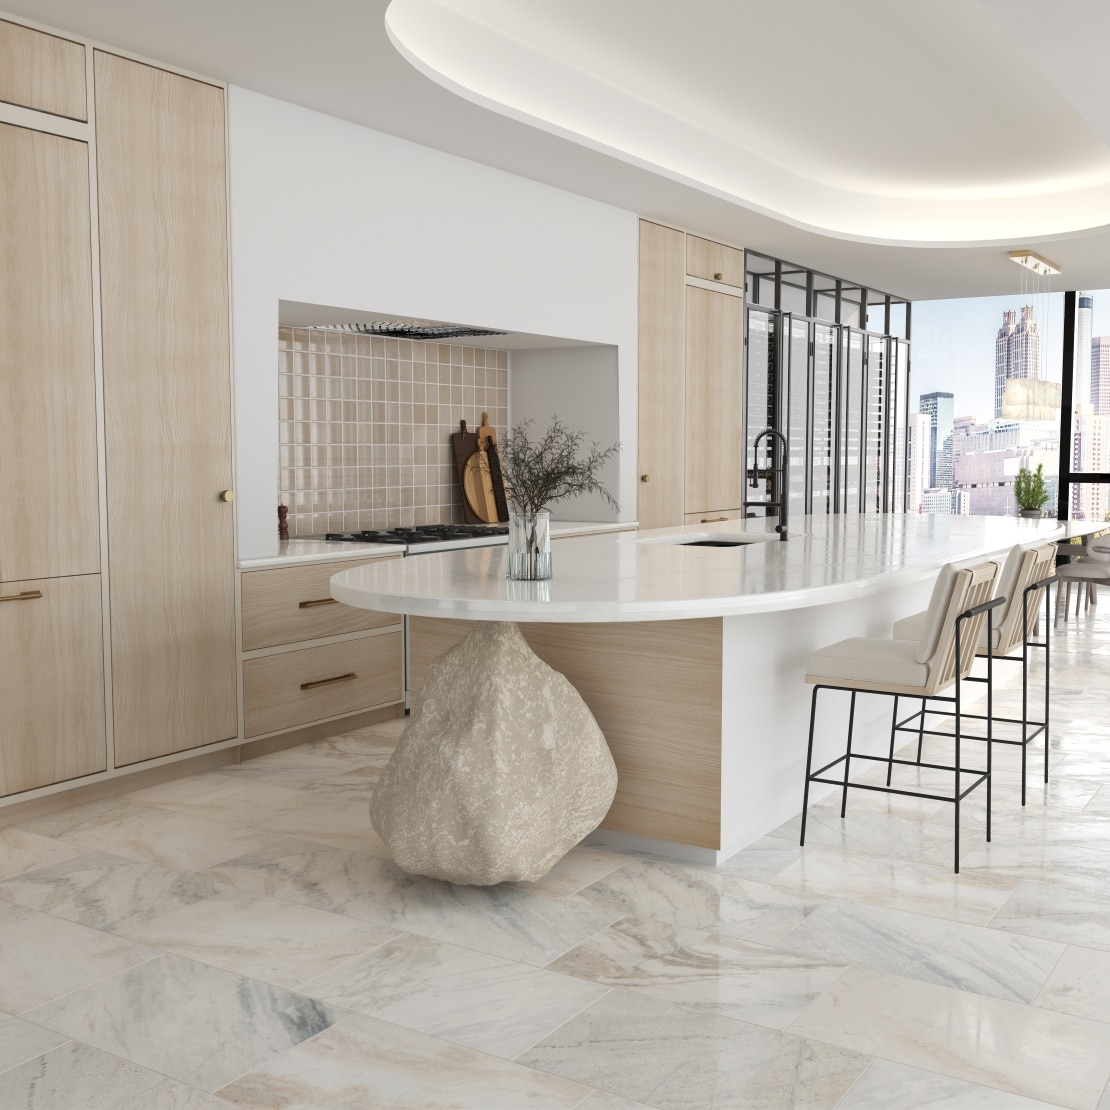 Residential kitchen with beige tones throughout.